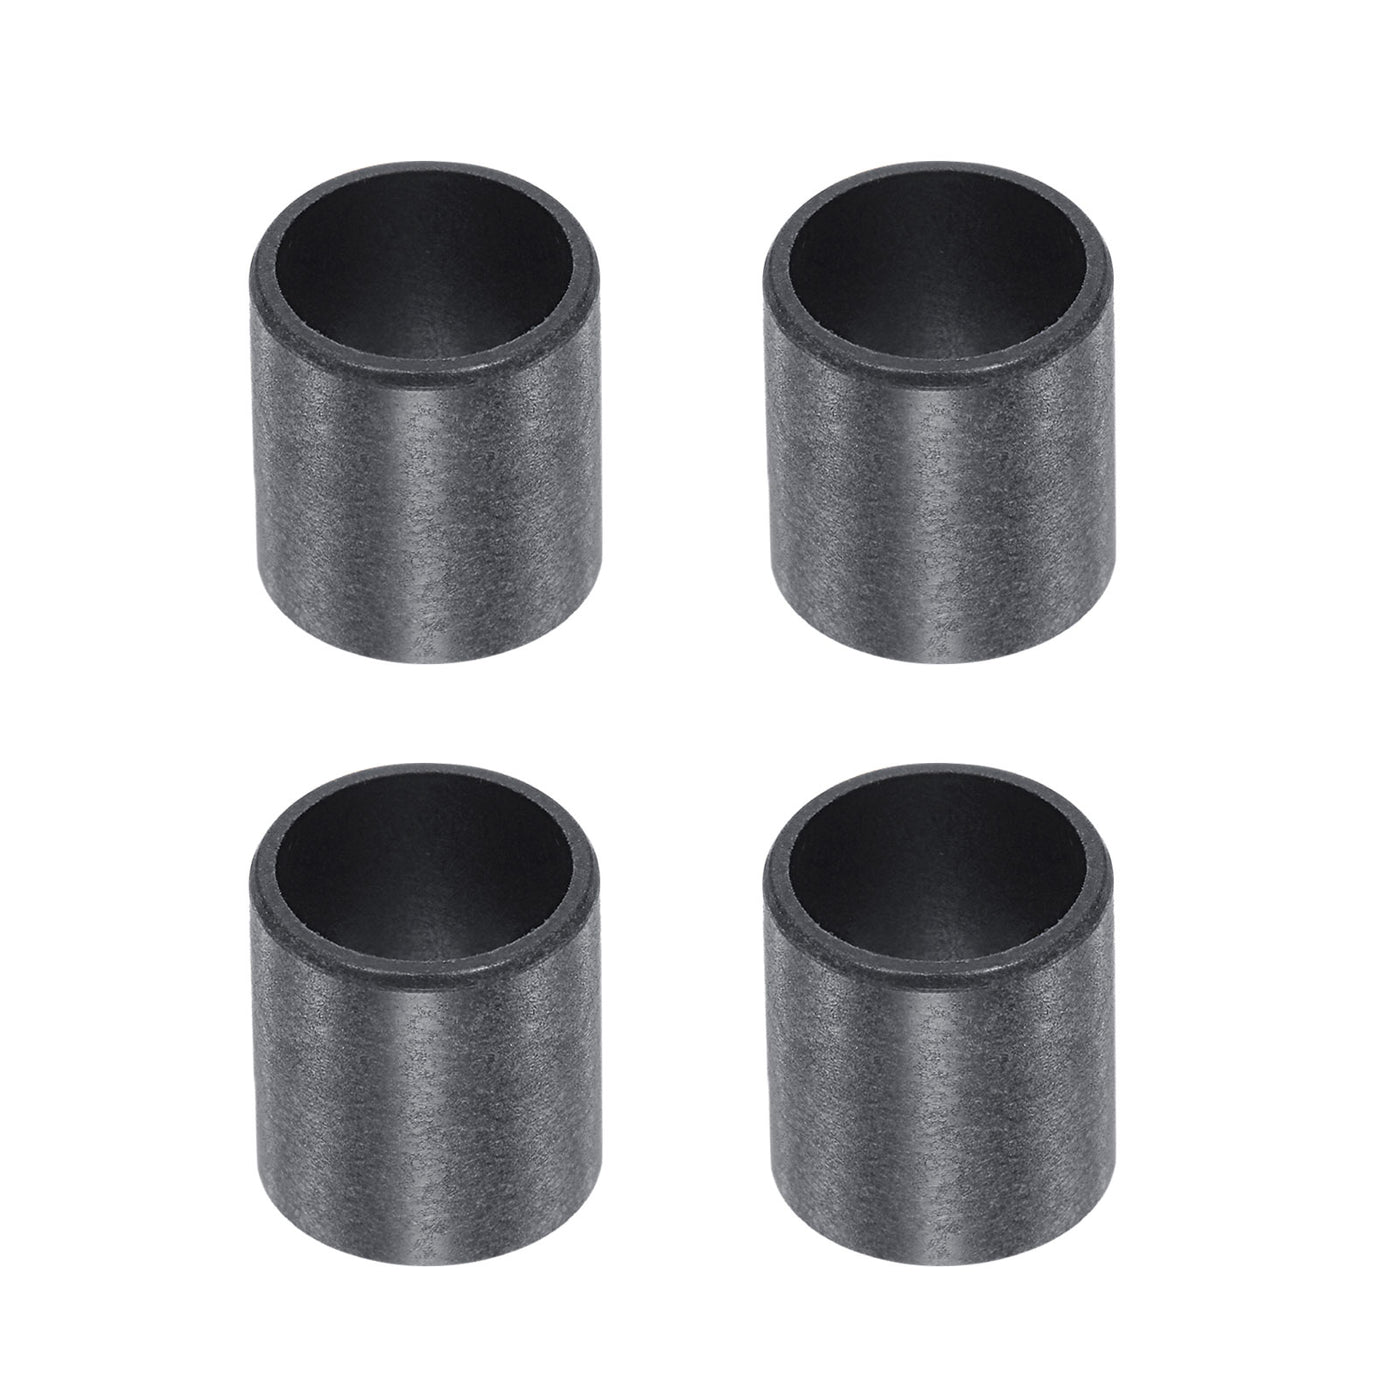 uxcell Uxcell Sleeve Bearings 10mmx12mmx12mm POM Wrapped Oilless Bushings Black 4pcs